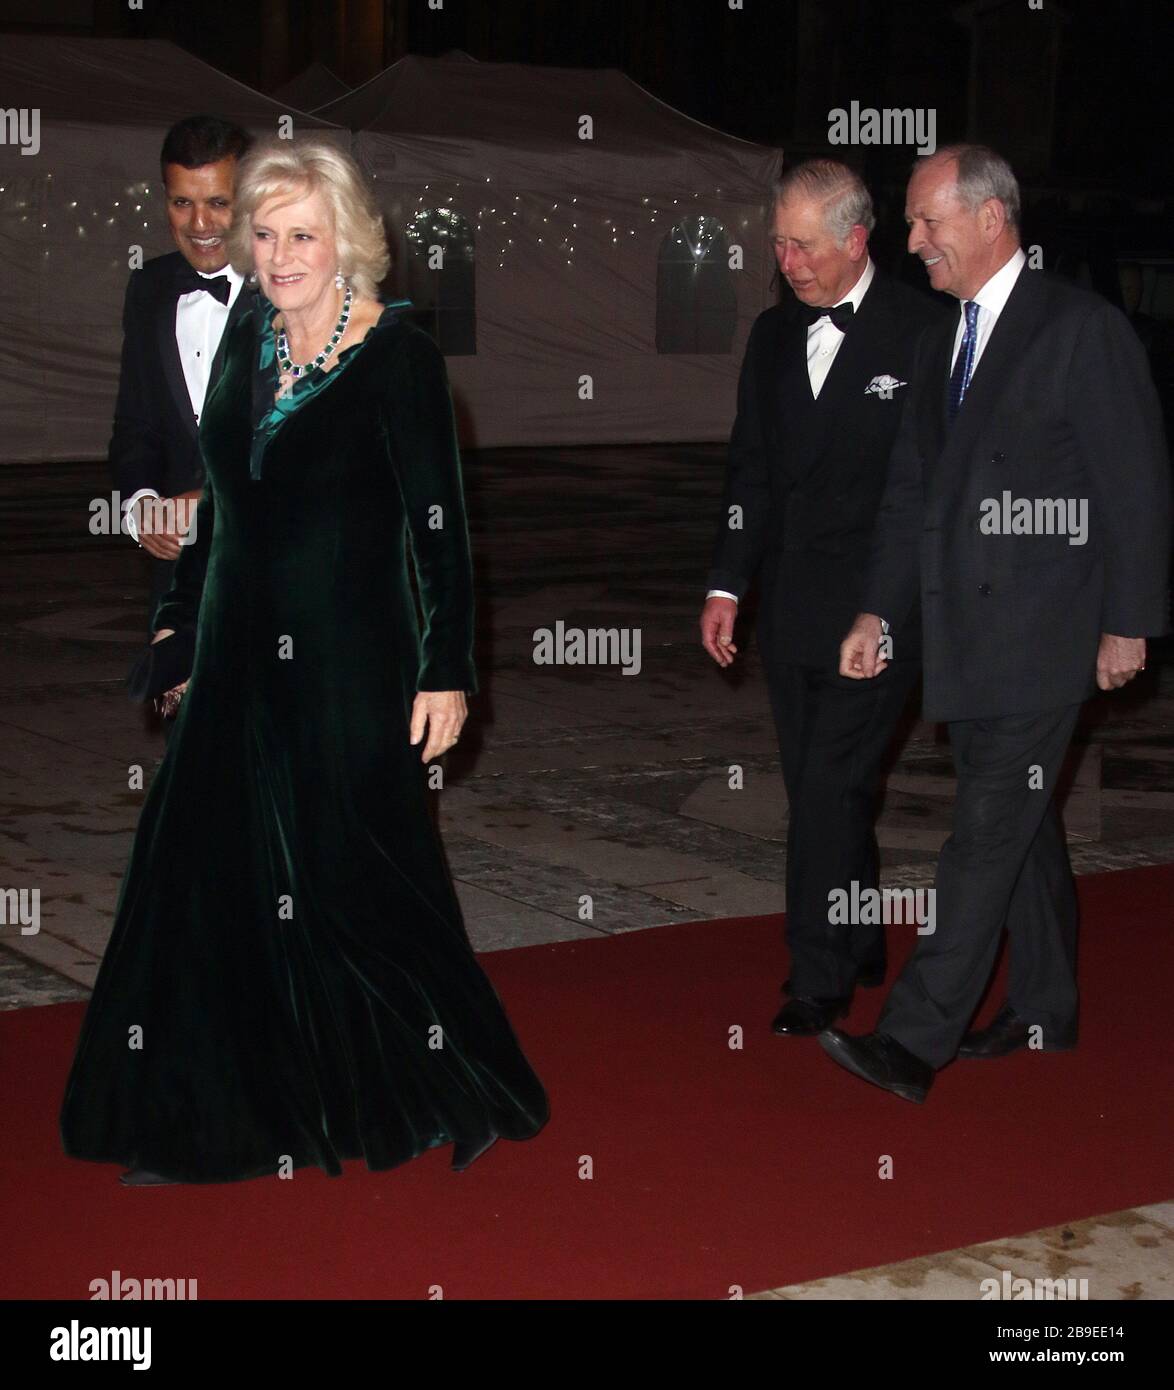 Feb 02, 2017 - London, England, UK - The British Asian Trust reception and dinner, Guildhall - Red Carpet Arrivals Photo Shows: Camilla, Duchess Of Co Stock Photo